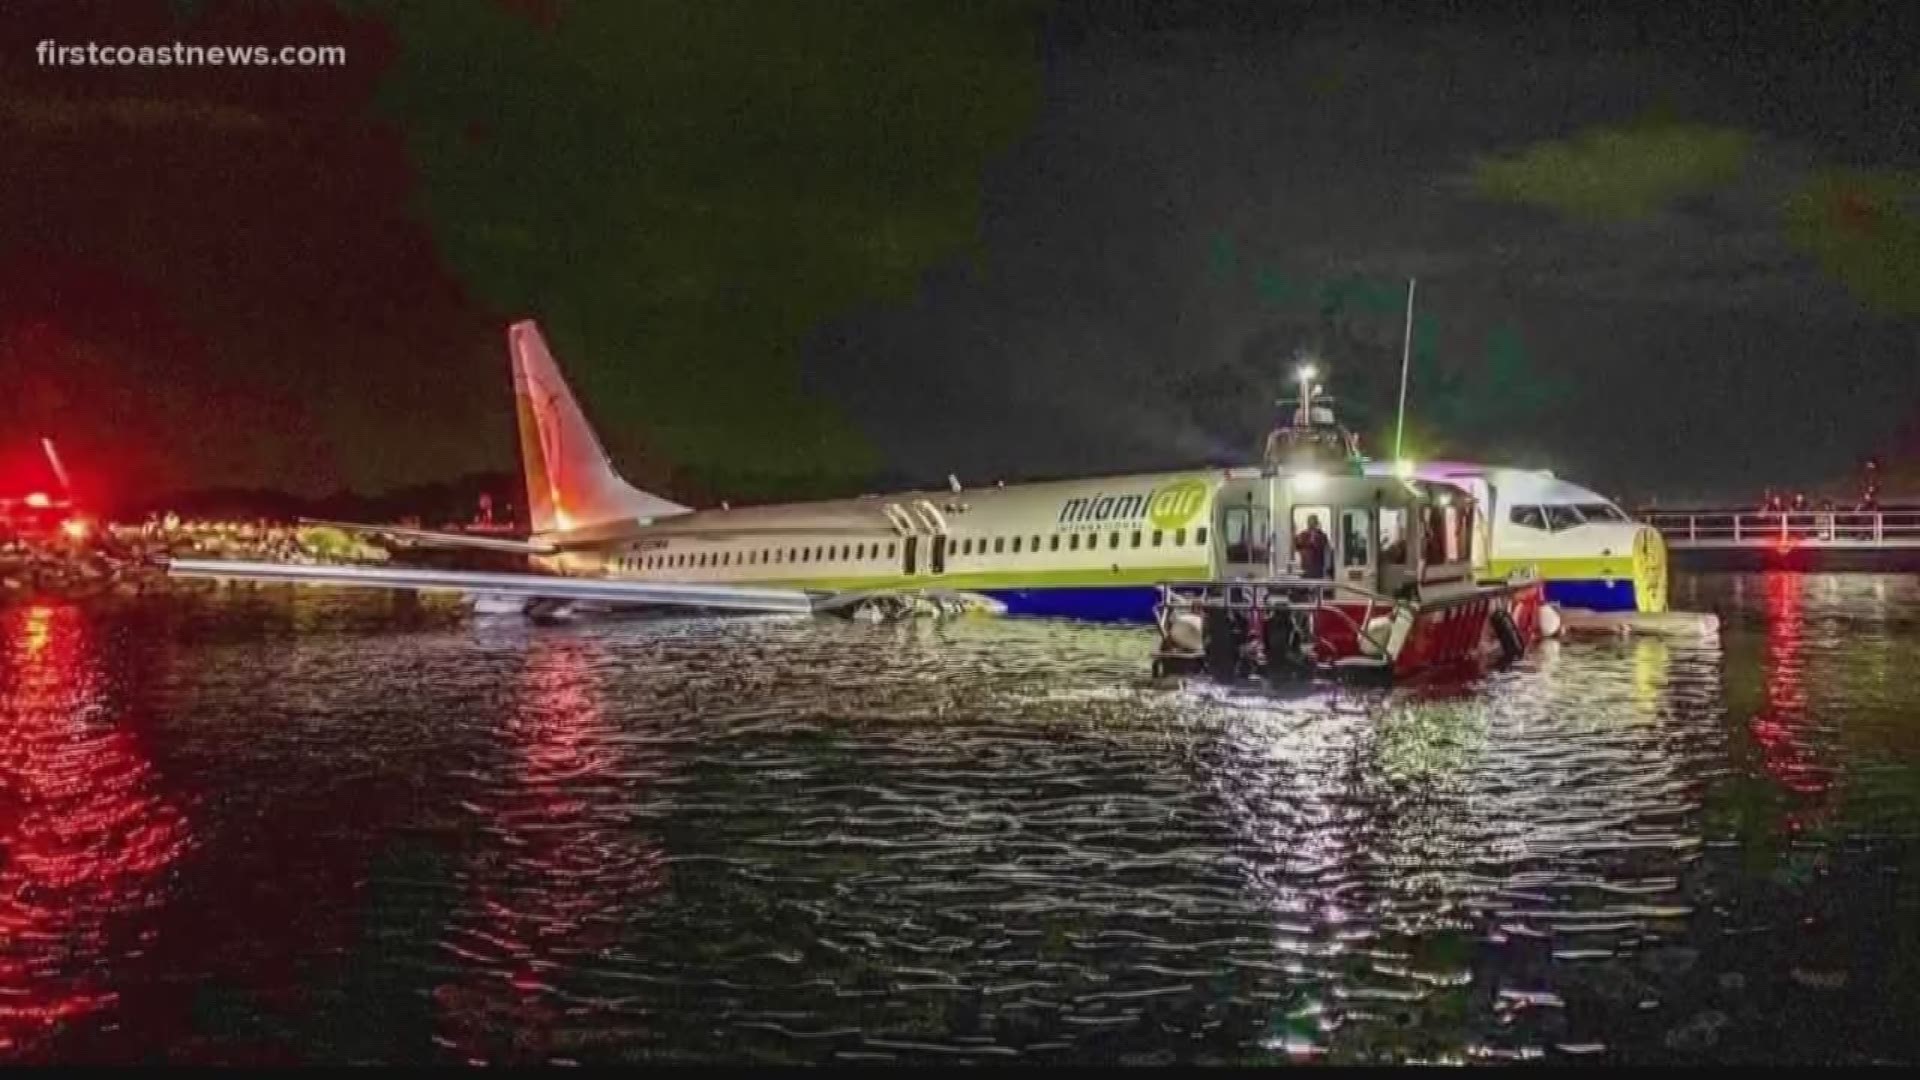 The 737 aircraft that overran runway 10 at NAS Jacksonville Friday night will be moved by barge to Green Cove Springs. Hopes to transport the plane dwindled Tuesday after the plane was lifted onto a barge from where it had come to rest at the edge of the St. Johns River after failing to stop.